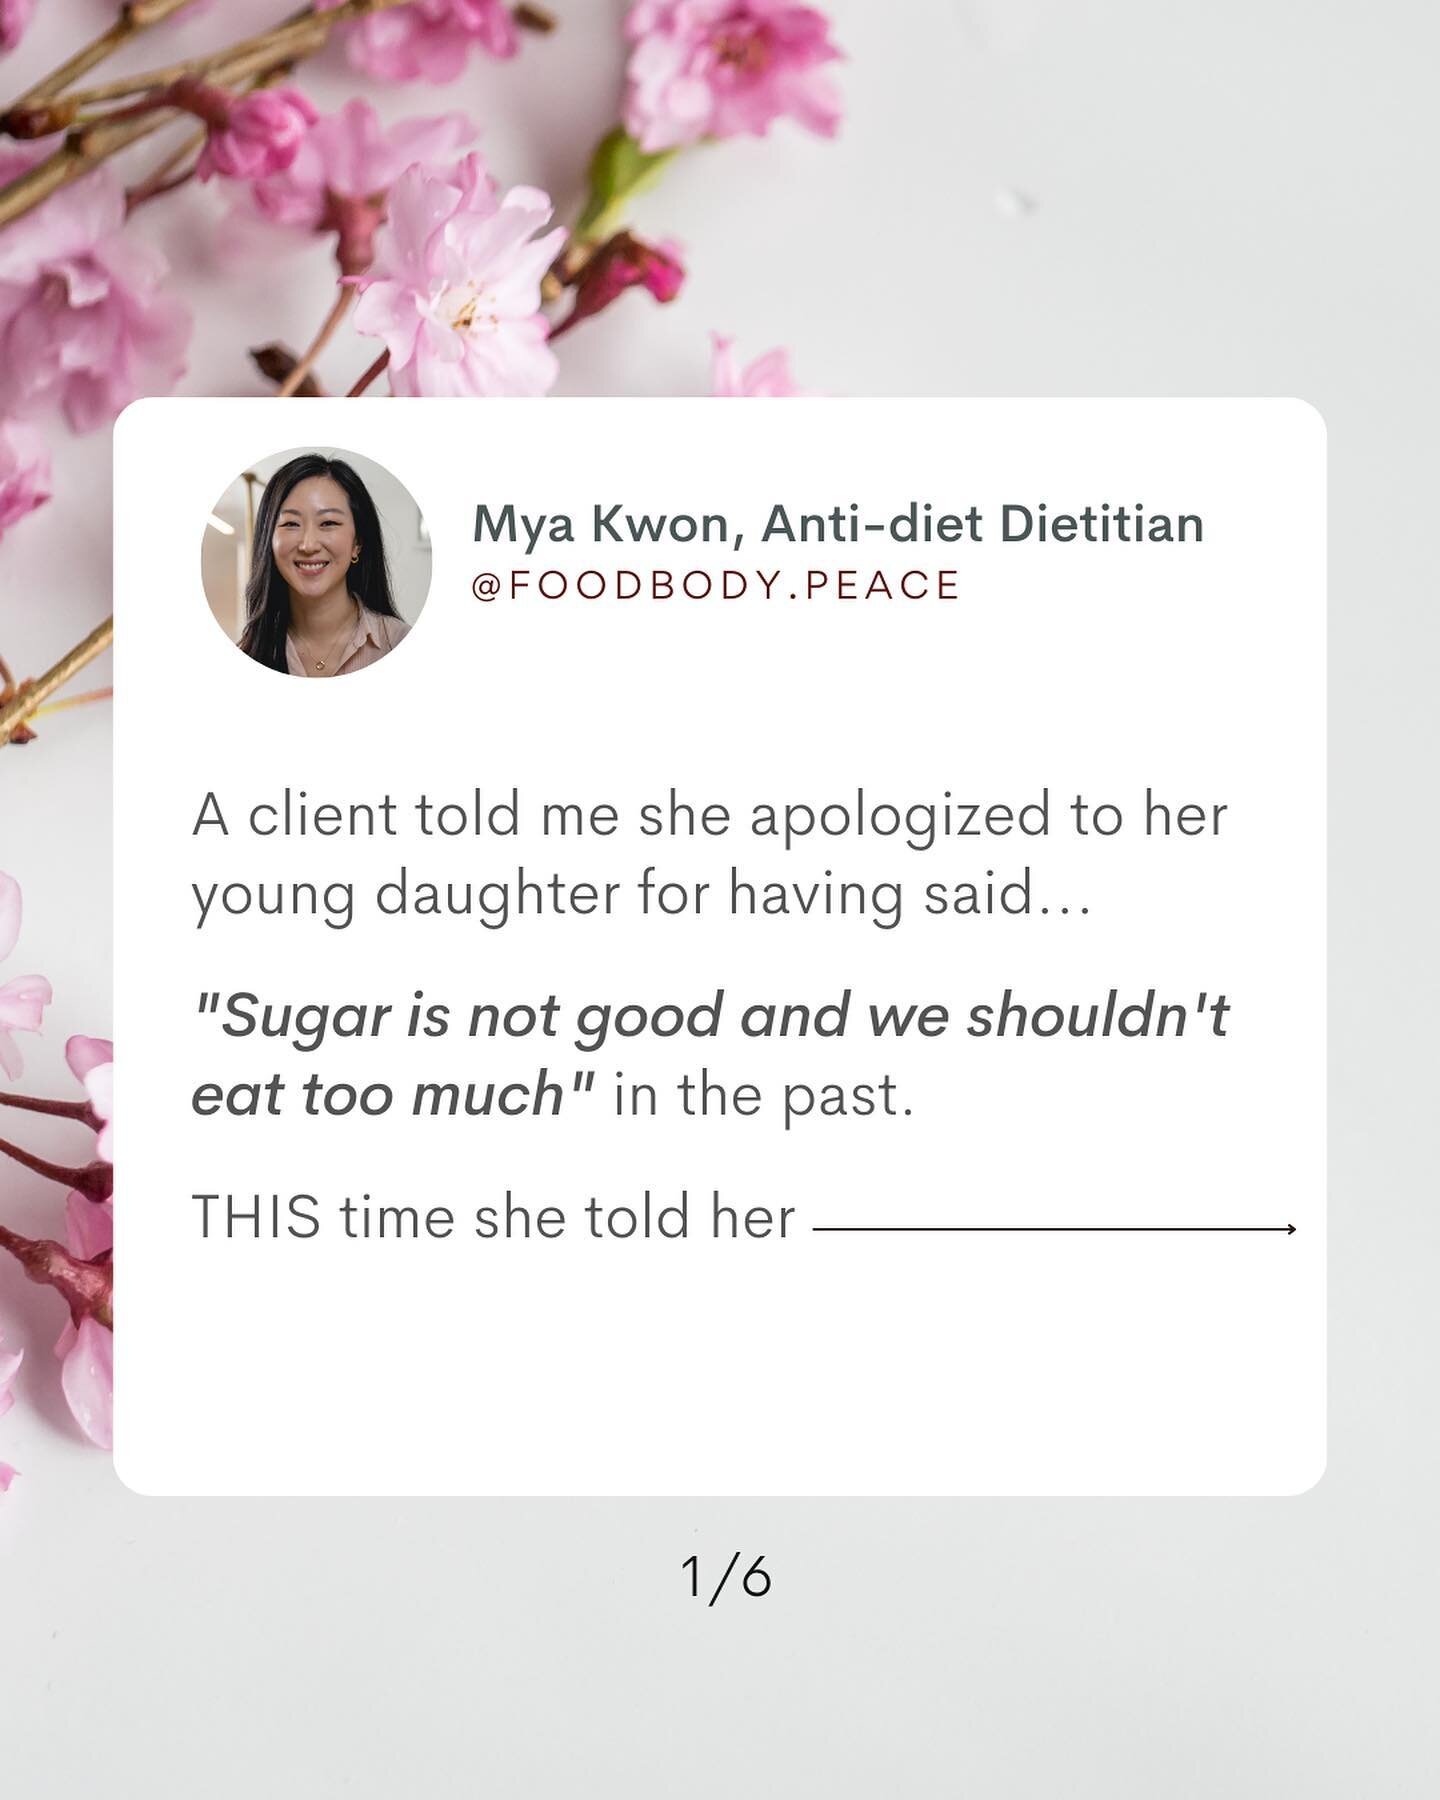 I almost cried when my client told me what she said about sugar to her daughter THIS time 😭⁠ (It's in slide 2!)⁠
⁠
When I ask clients about their first memories of food + body struggles, the stories usually go WAY back to childhood, involve our care